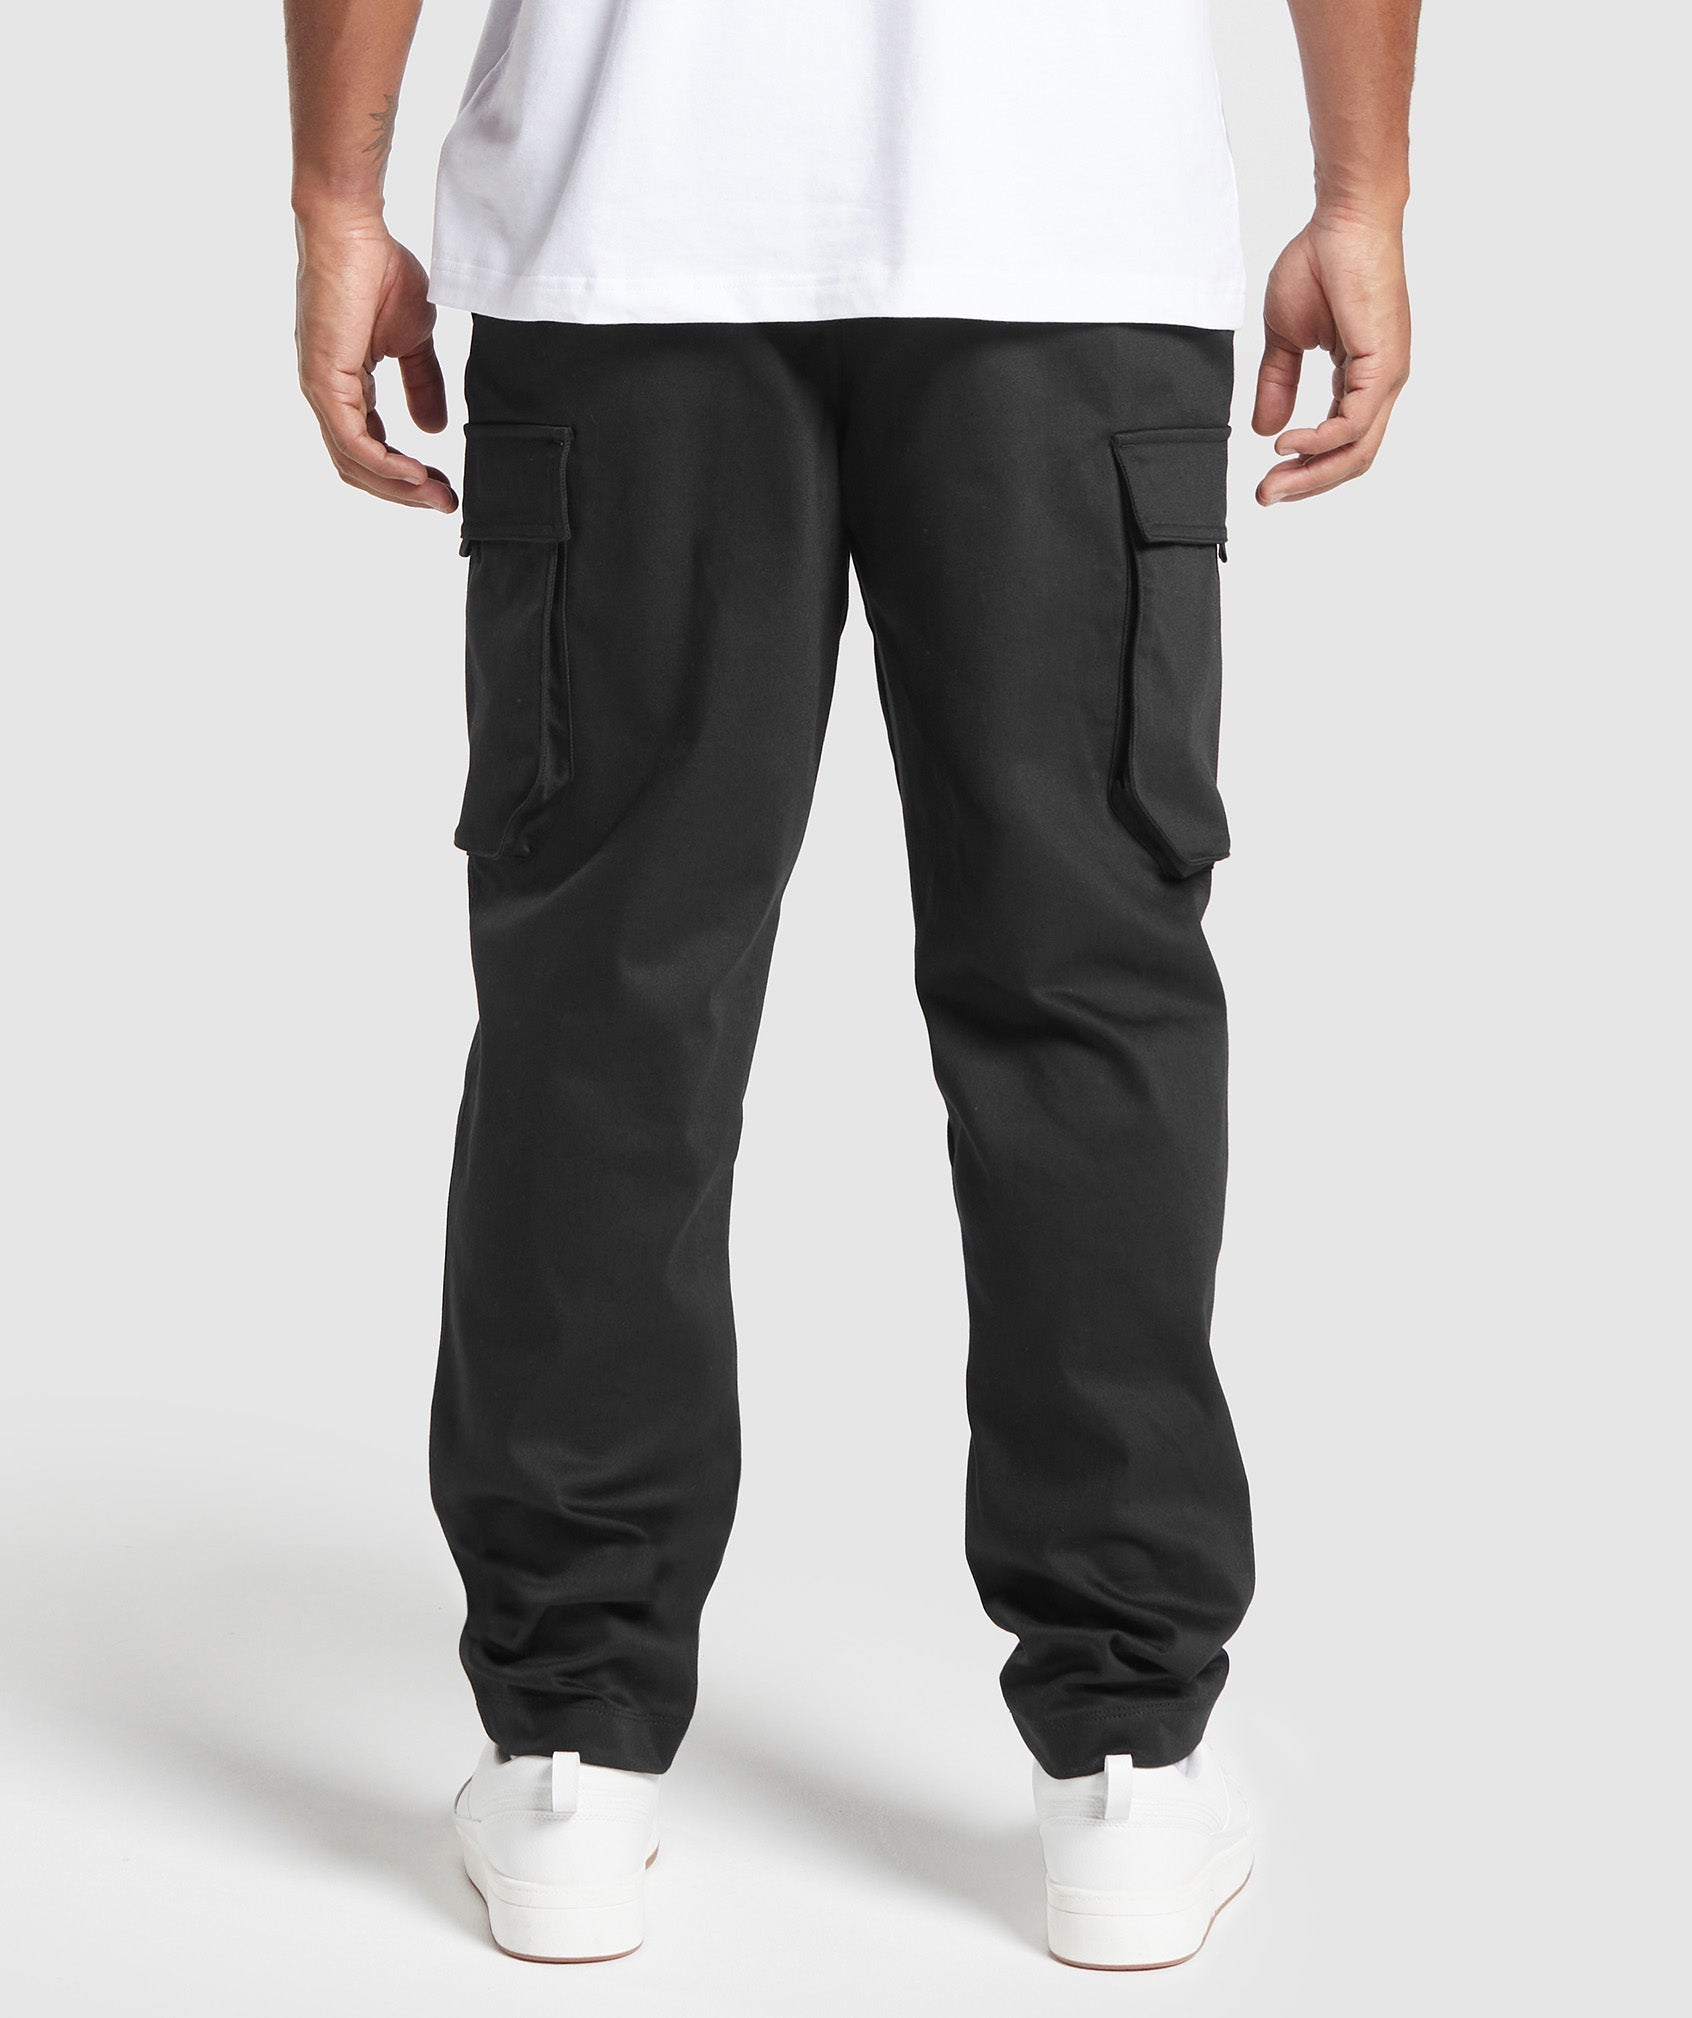 Rest Day Woven Cargo Pants in Black - view 3